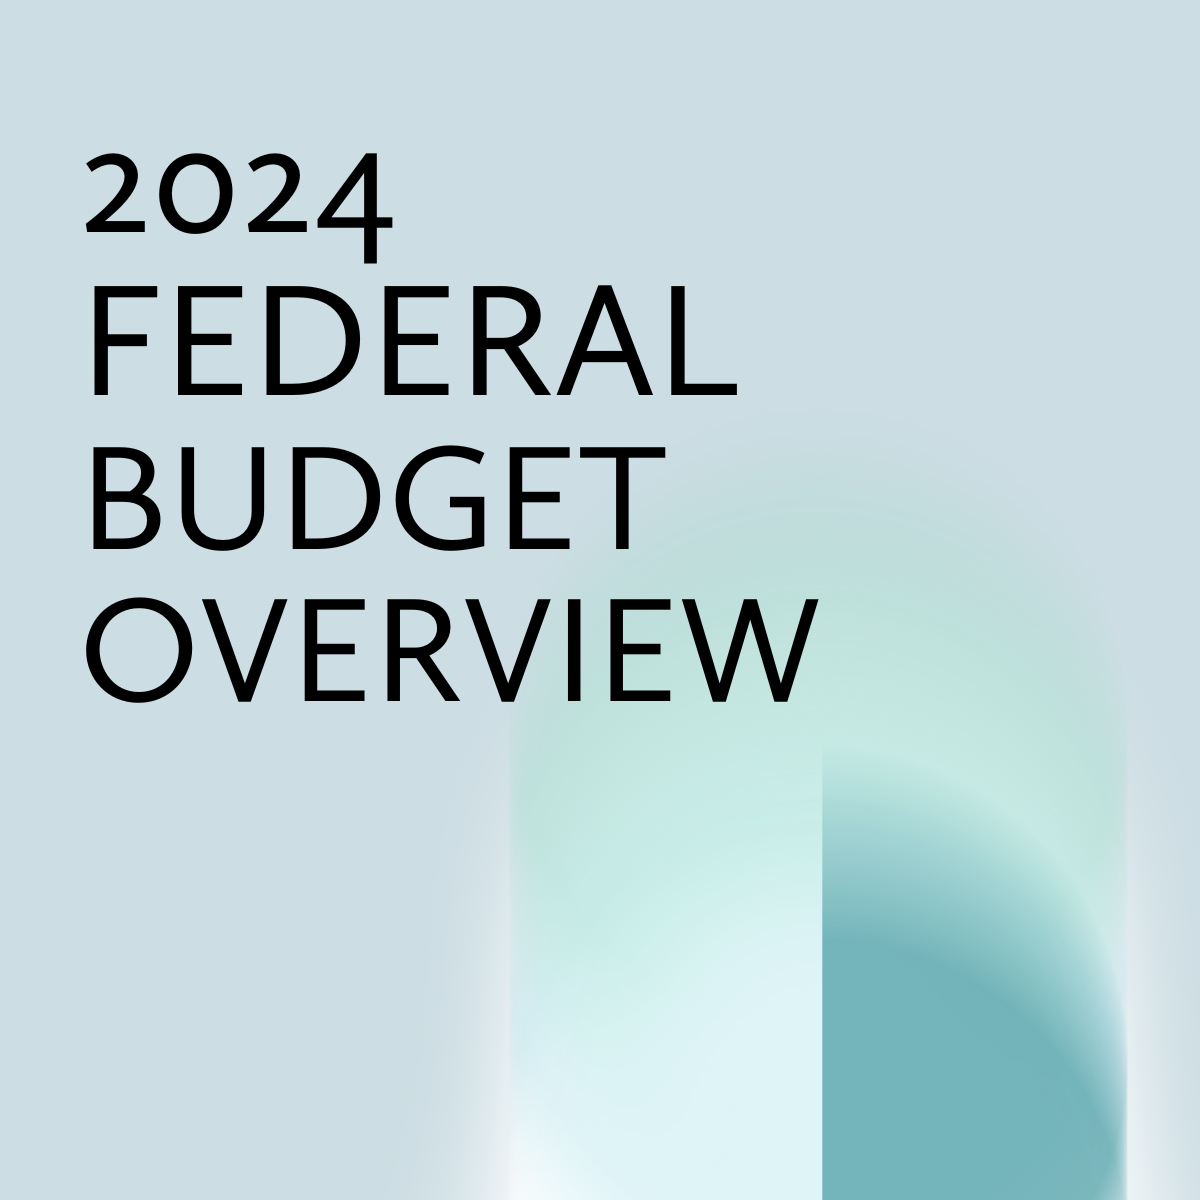 Cost of living relief drives 2024 budget